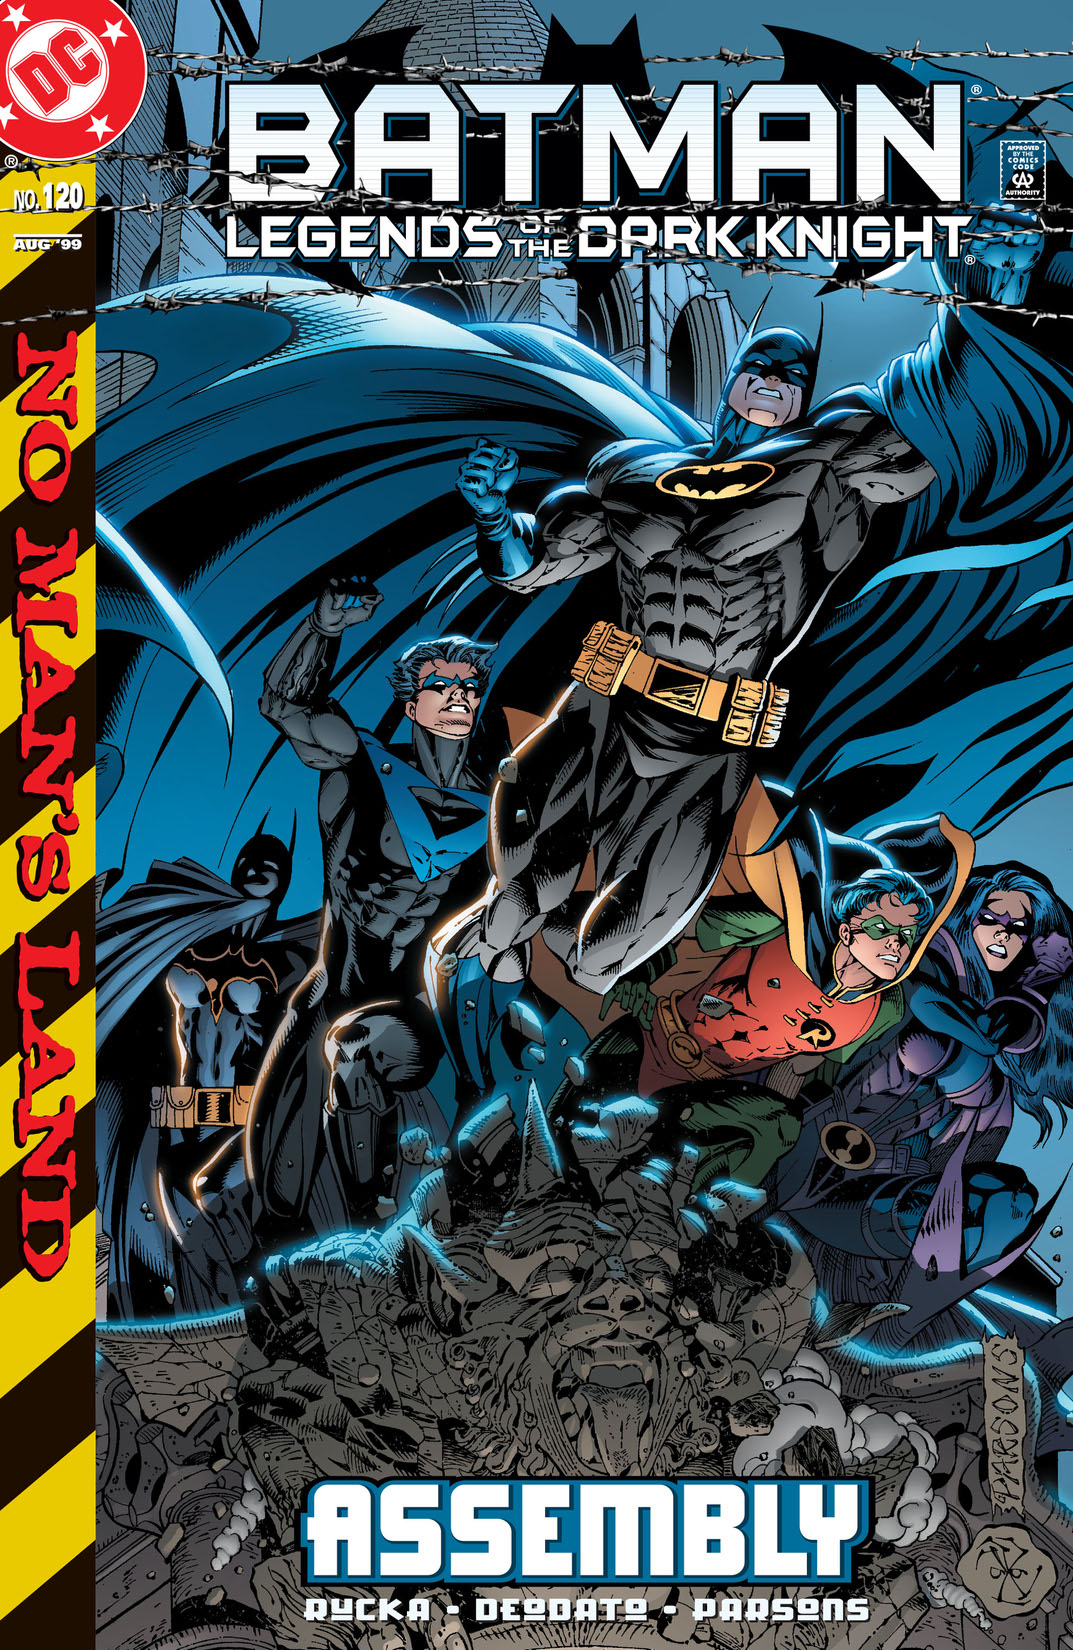 Batman: Legends of the Dark Knight #120 preview images